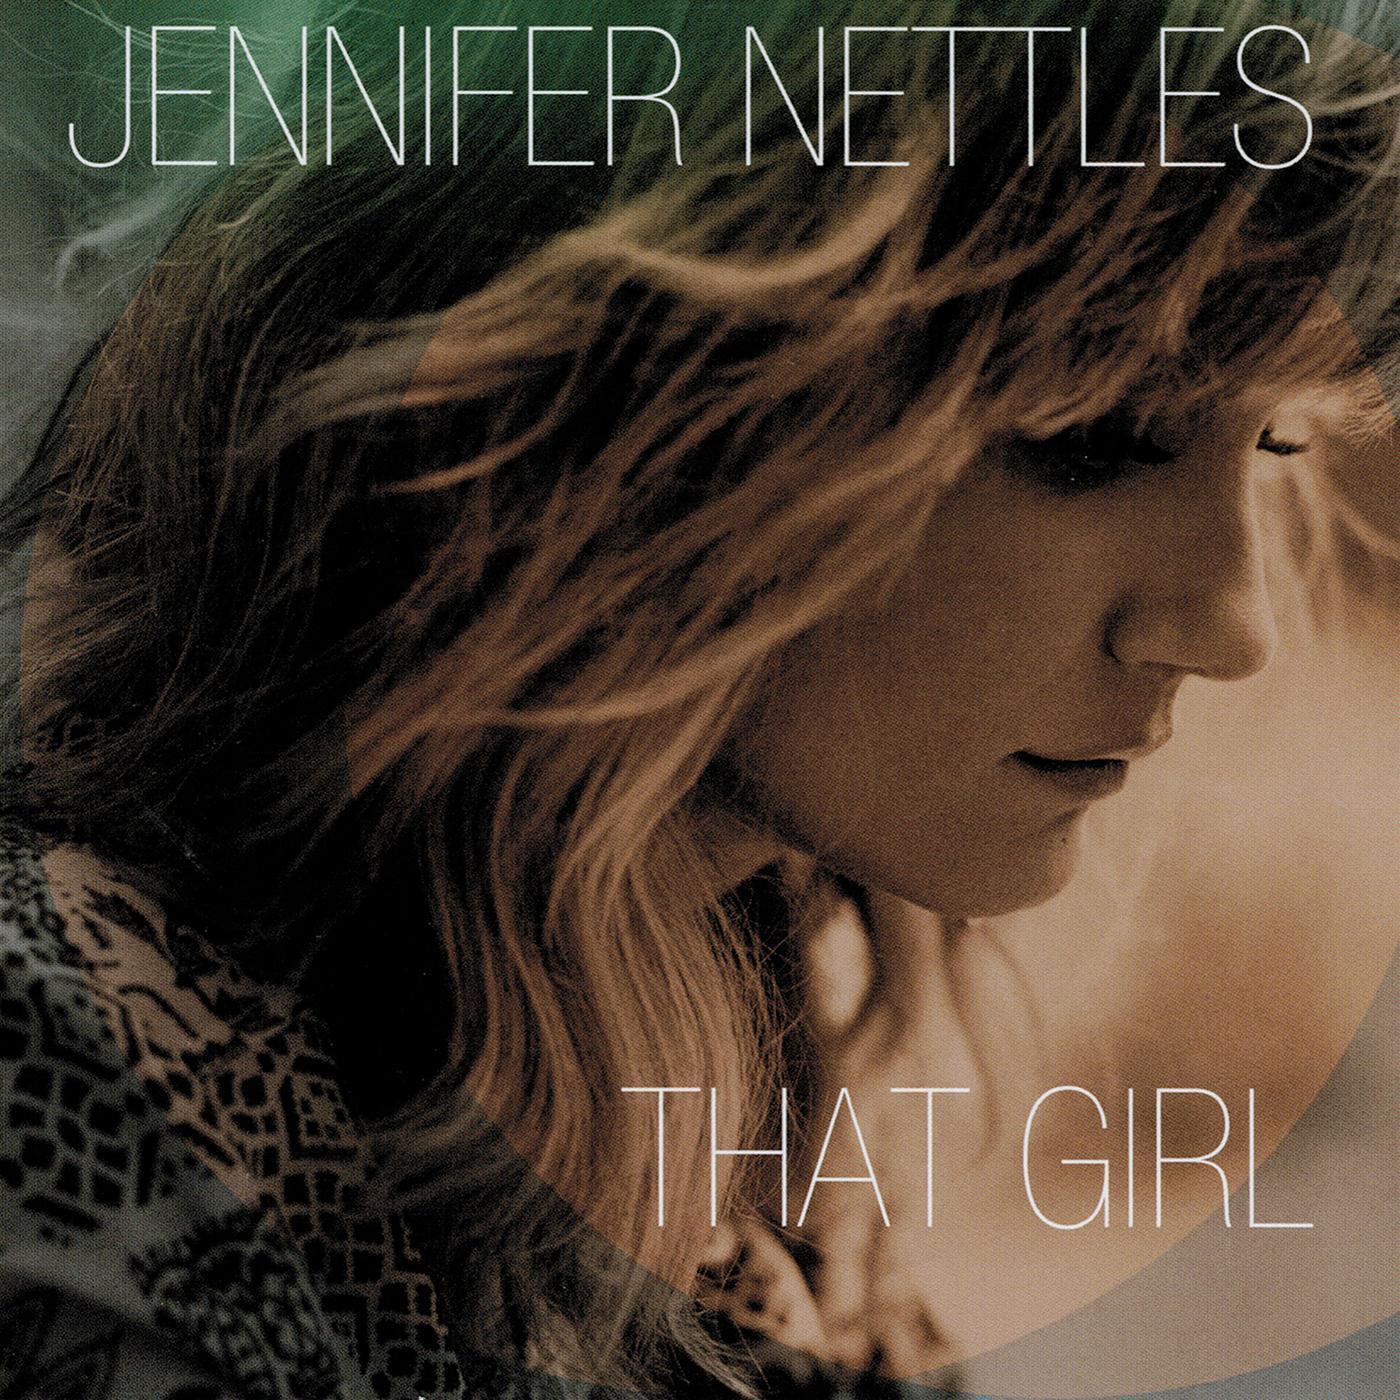 Jennifer Nettles - Good Time to Cry